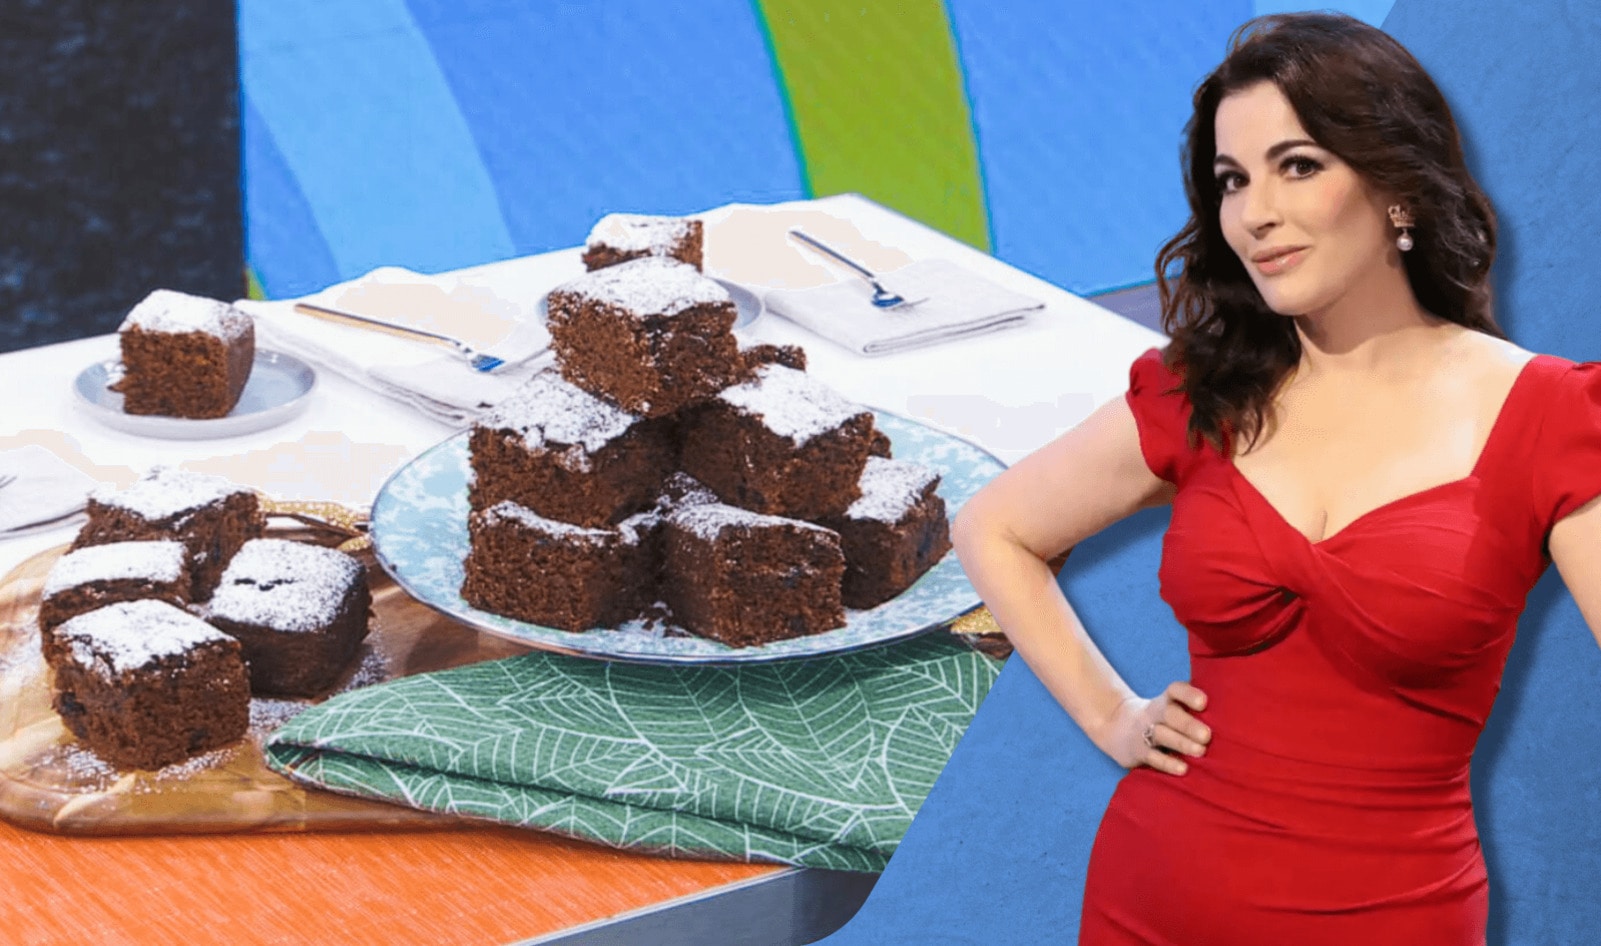 Nigella Lawson Makes Vegan Gingerbread on ‘Good Morning America’ With a Surprise Egg Replacer